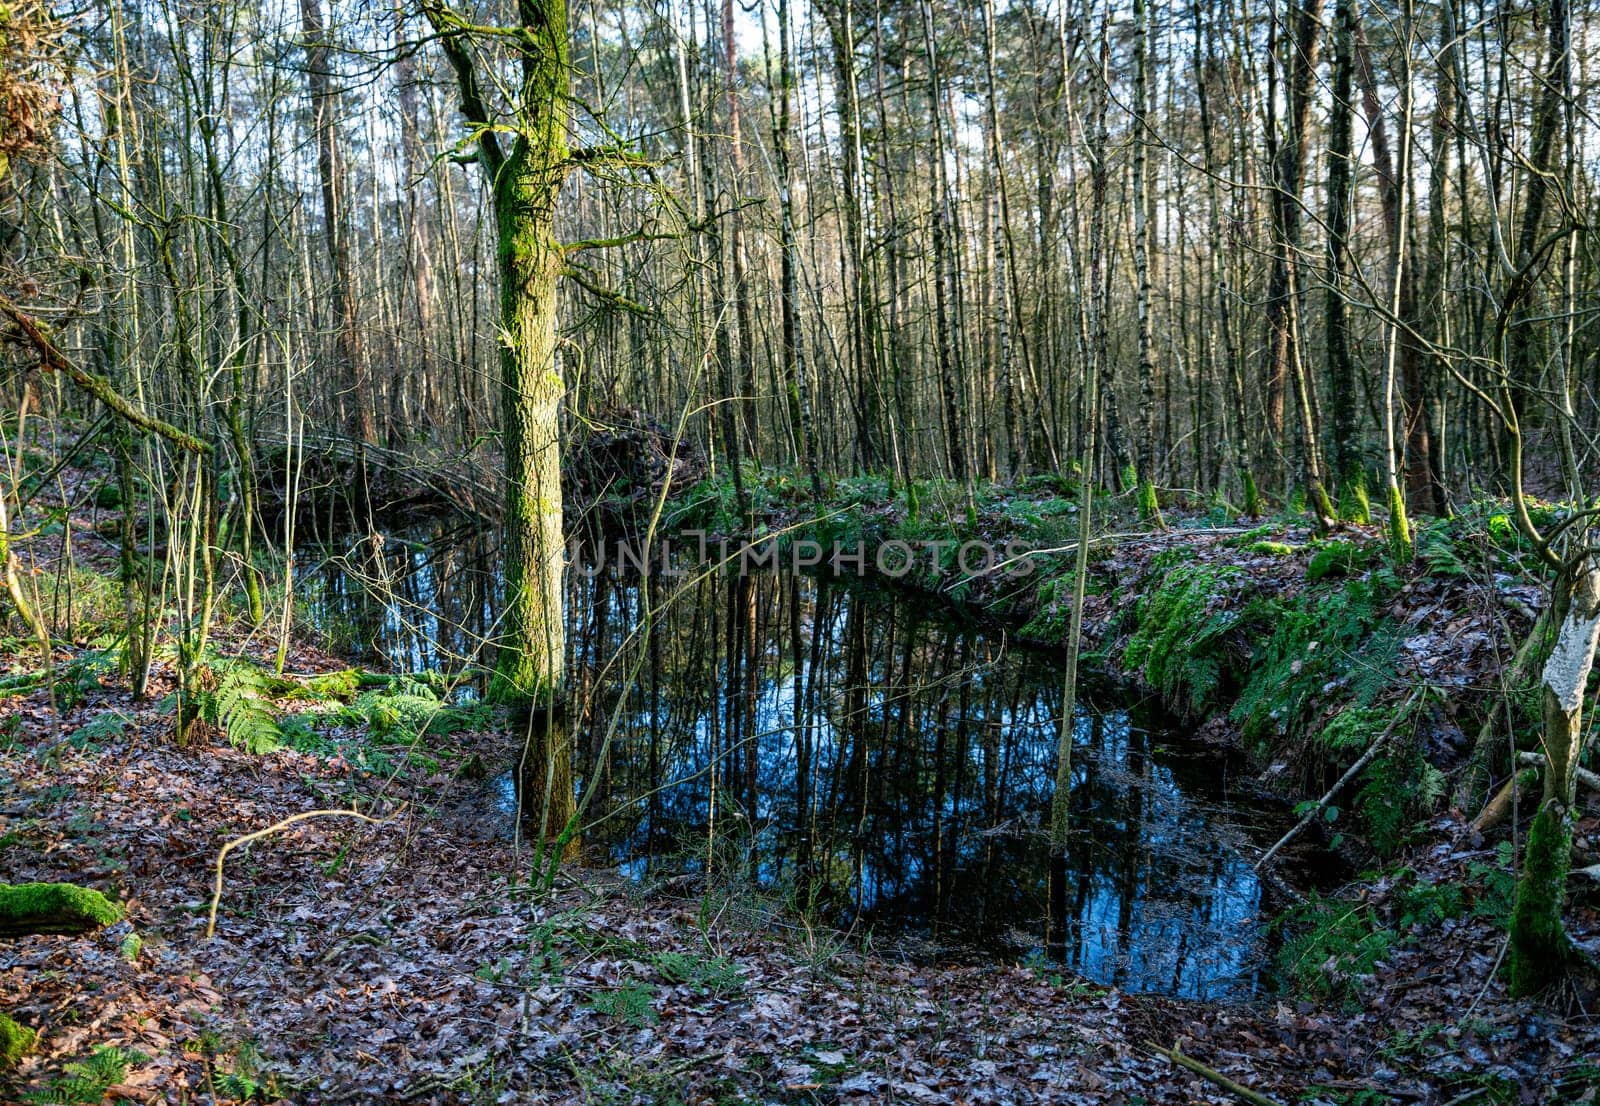 a small pond in the winter forest in bad bentheim germany by compuinfoto